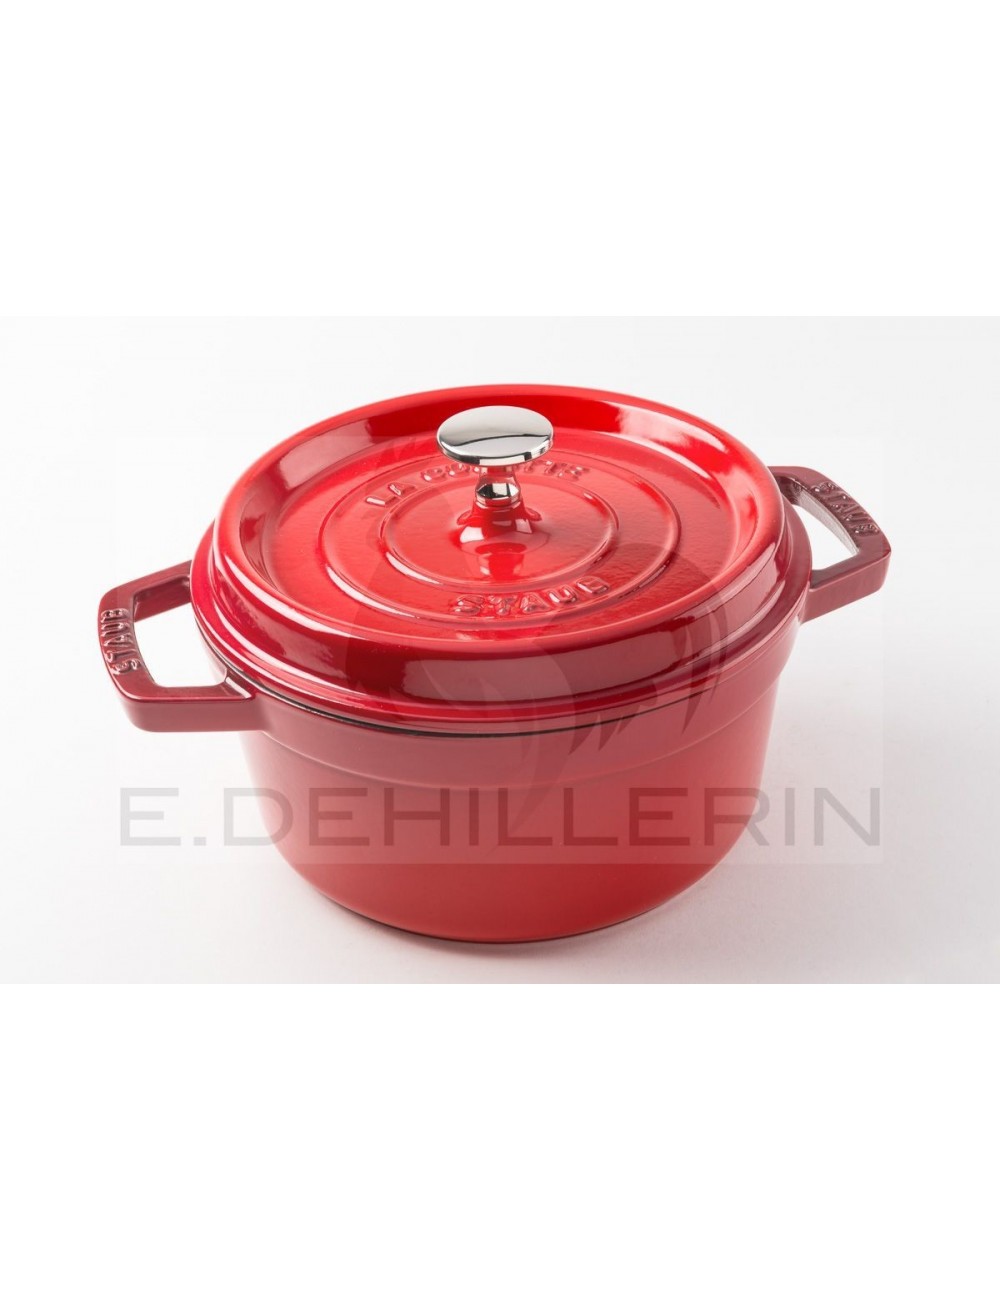 COCOTTE FONTE RONDE ROUGE - STAUB